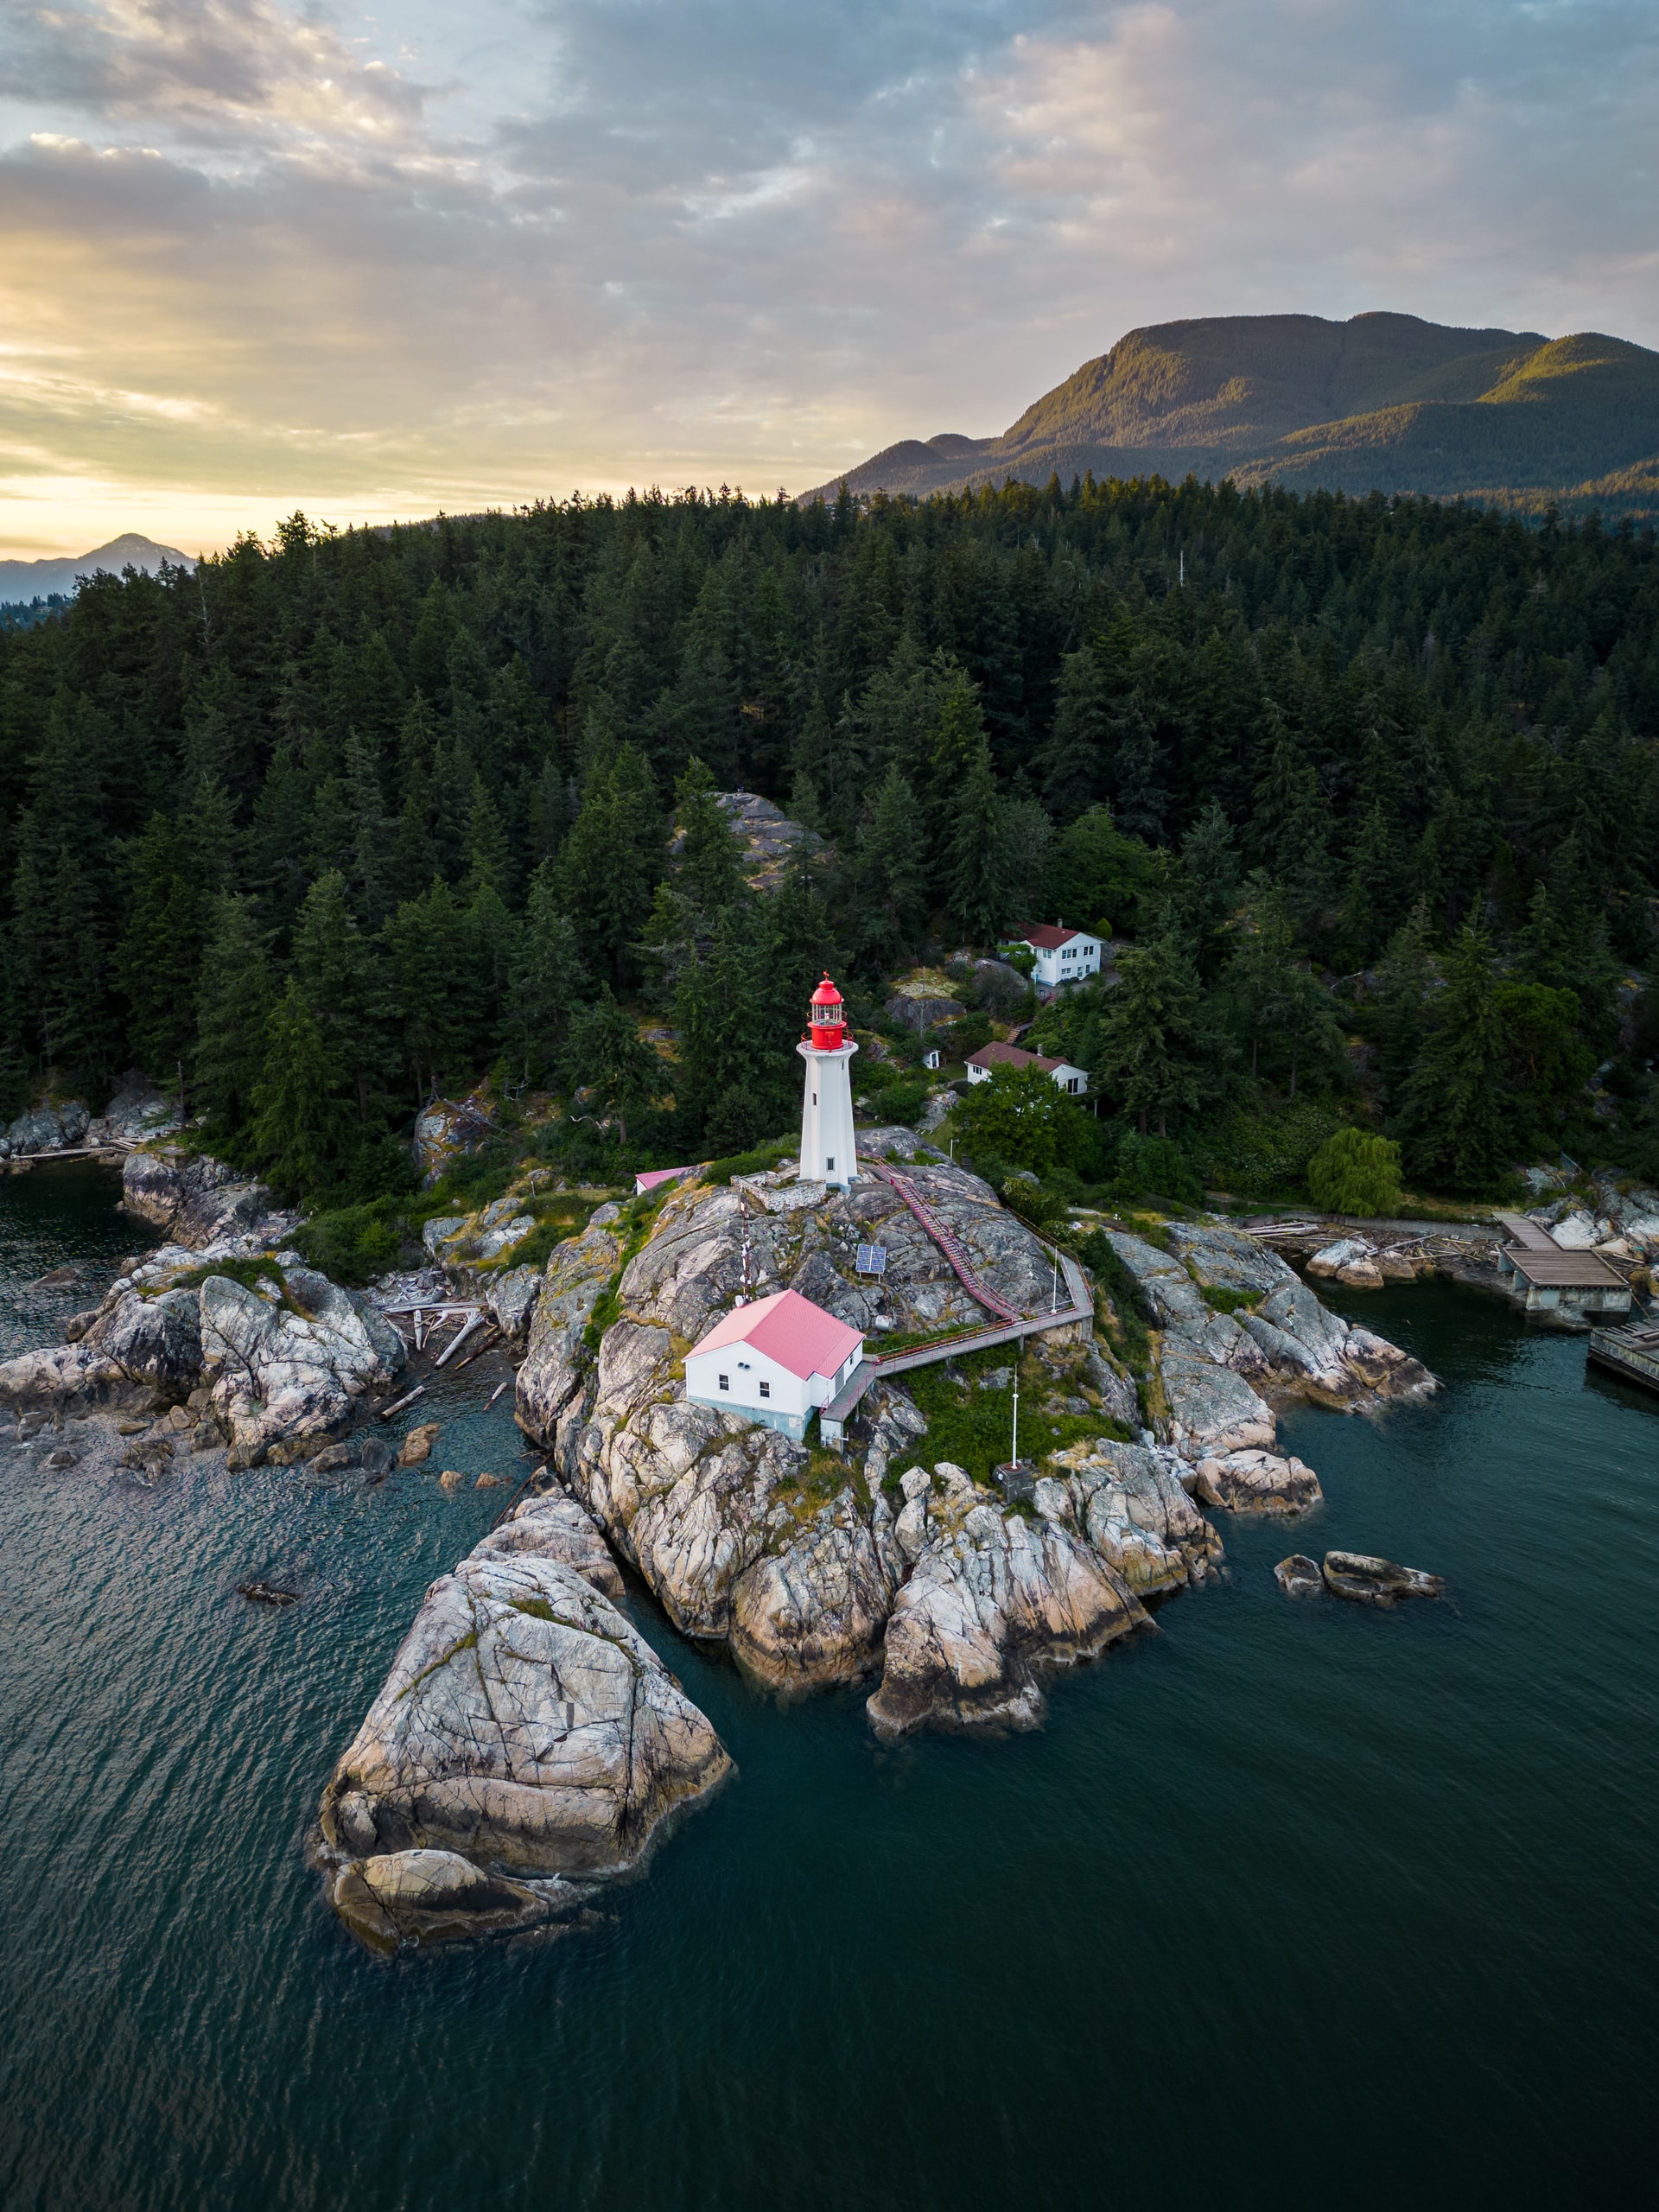 Add These Beautiful, Quiet Corners of Vancouver to Your List